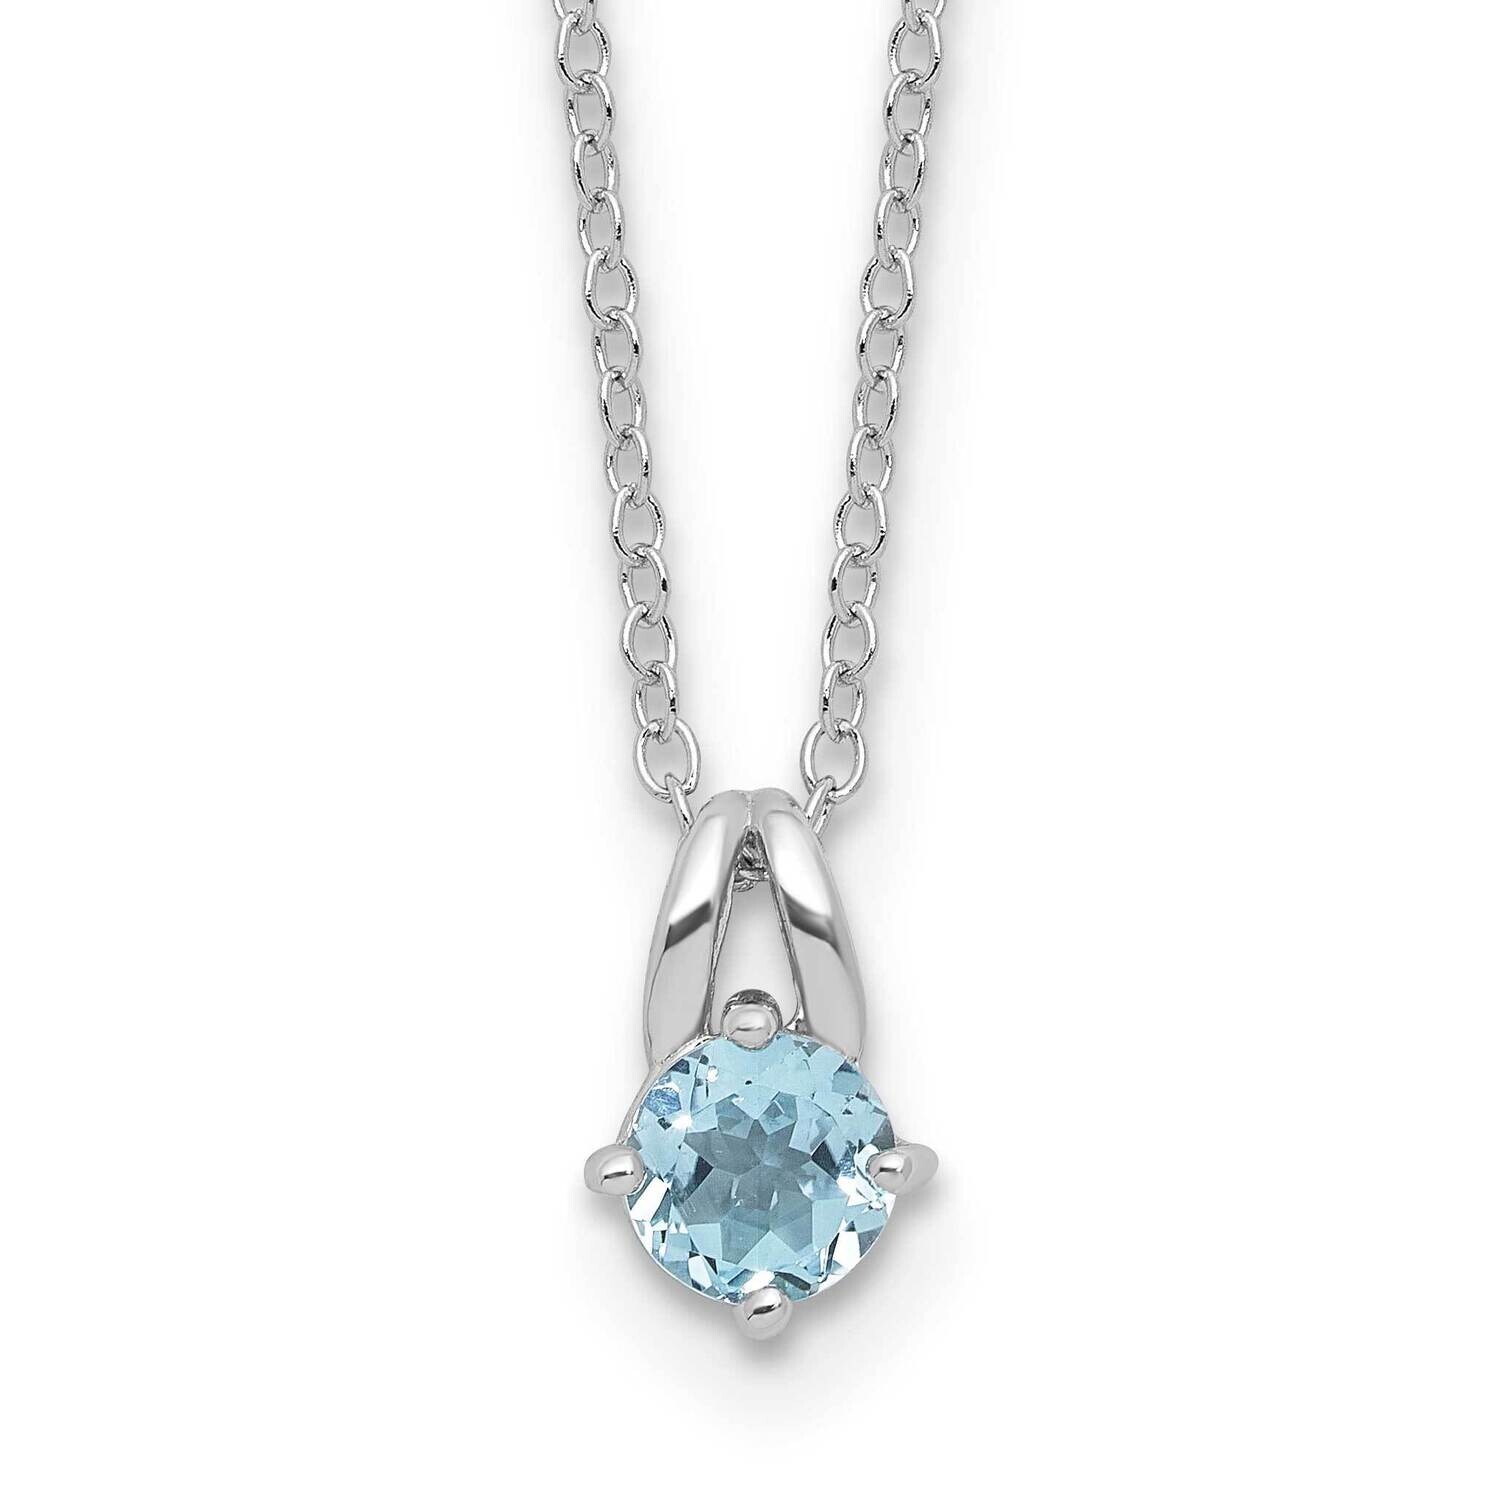 .59Bt Blue Topaz 16 Inch 2 Inch Extension Necklace Sterling Silver Rhodium-Plated QG6741BT-16